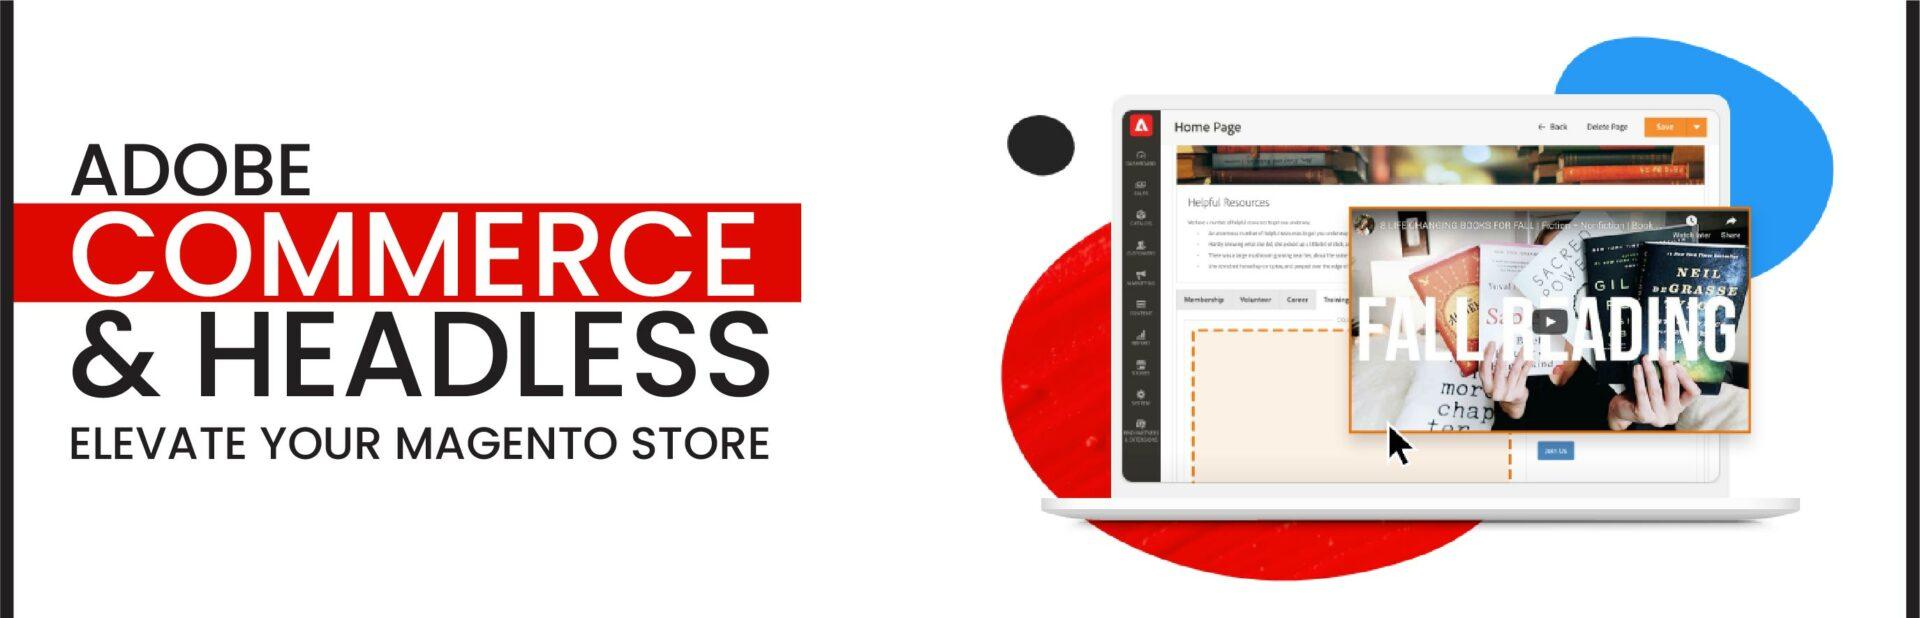 Adobe Commerce and Headless: Elevate Your Magento Store